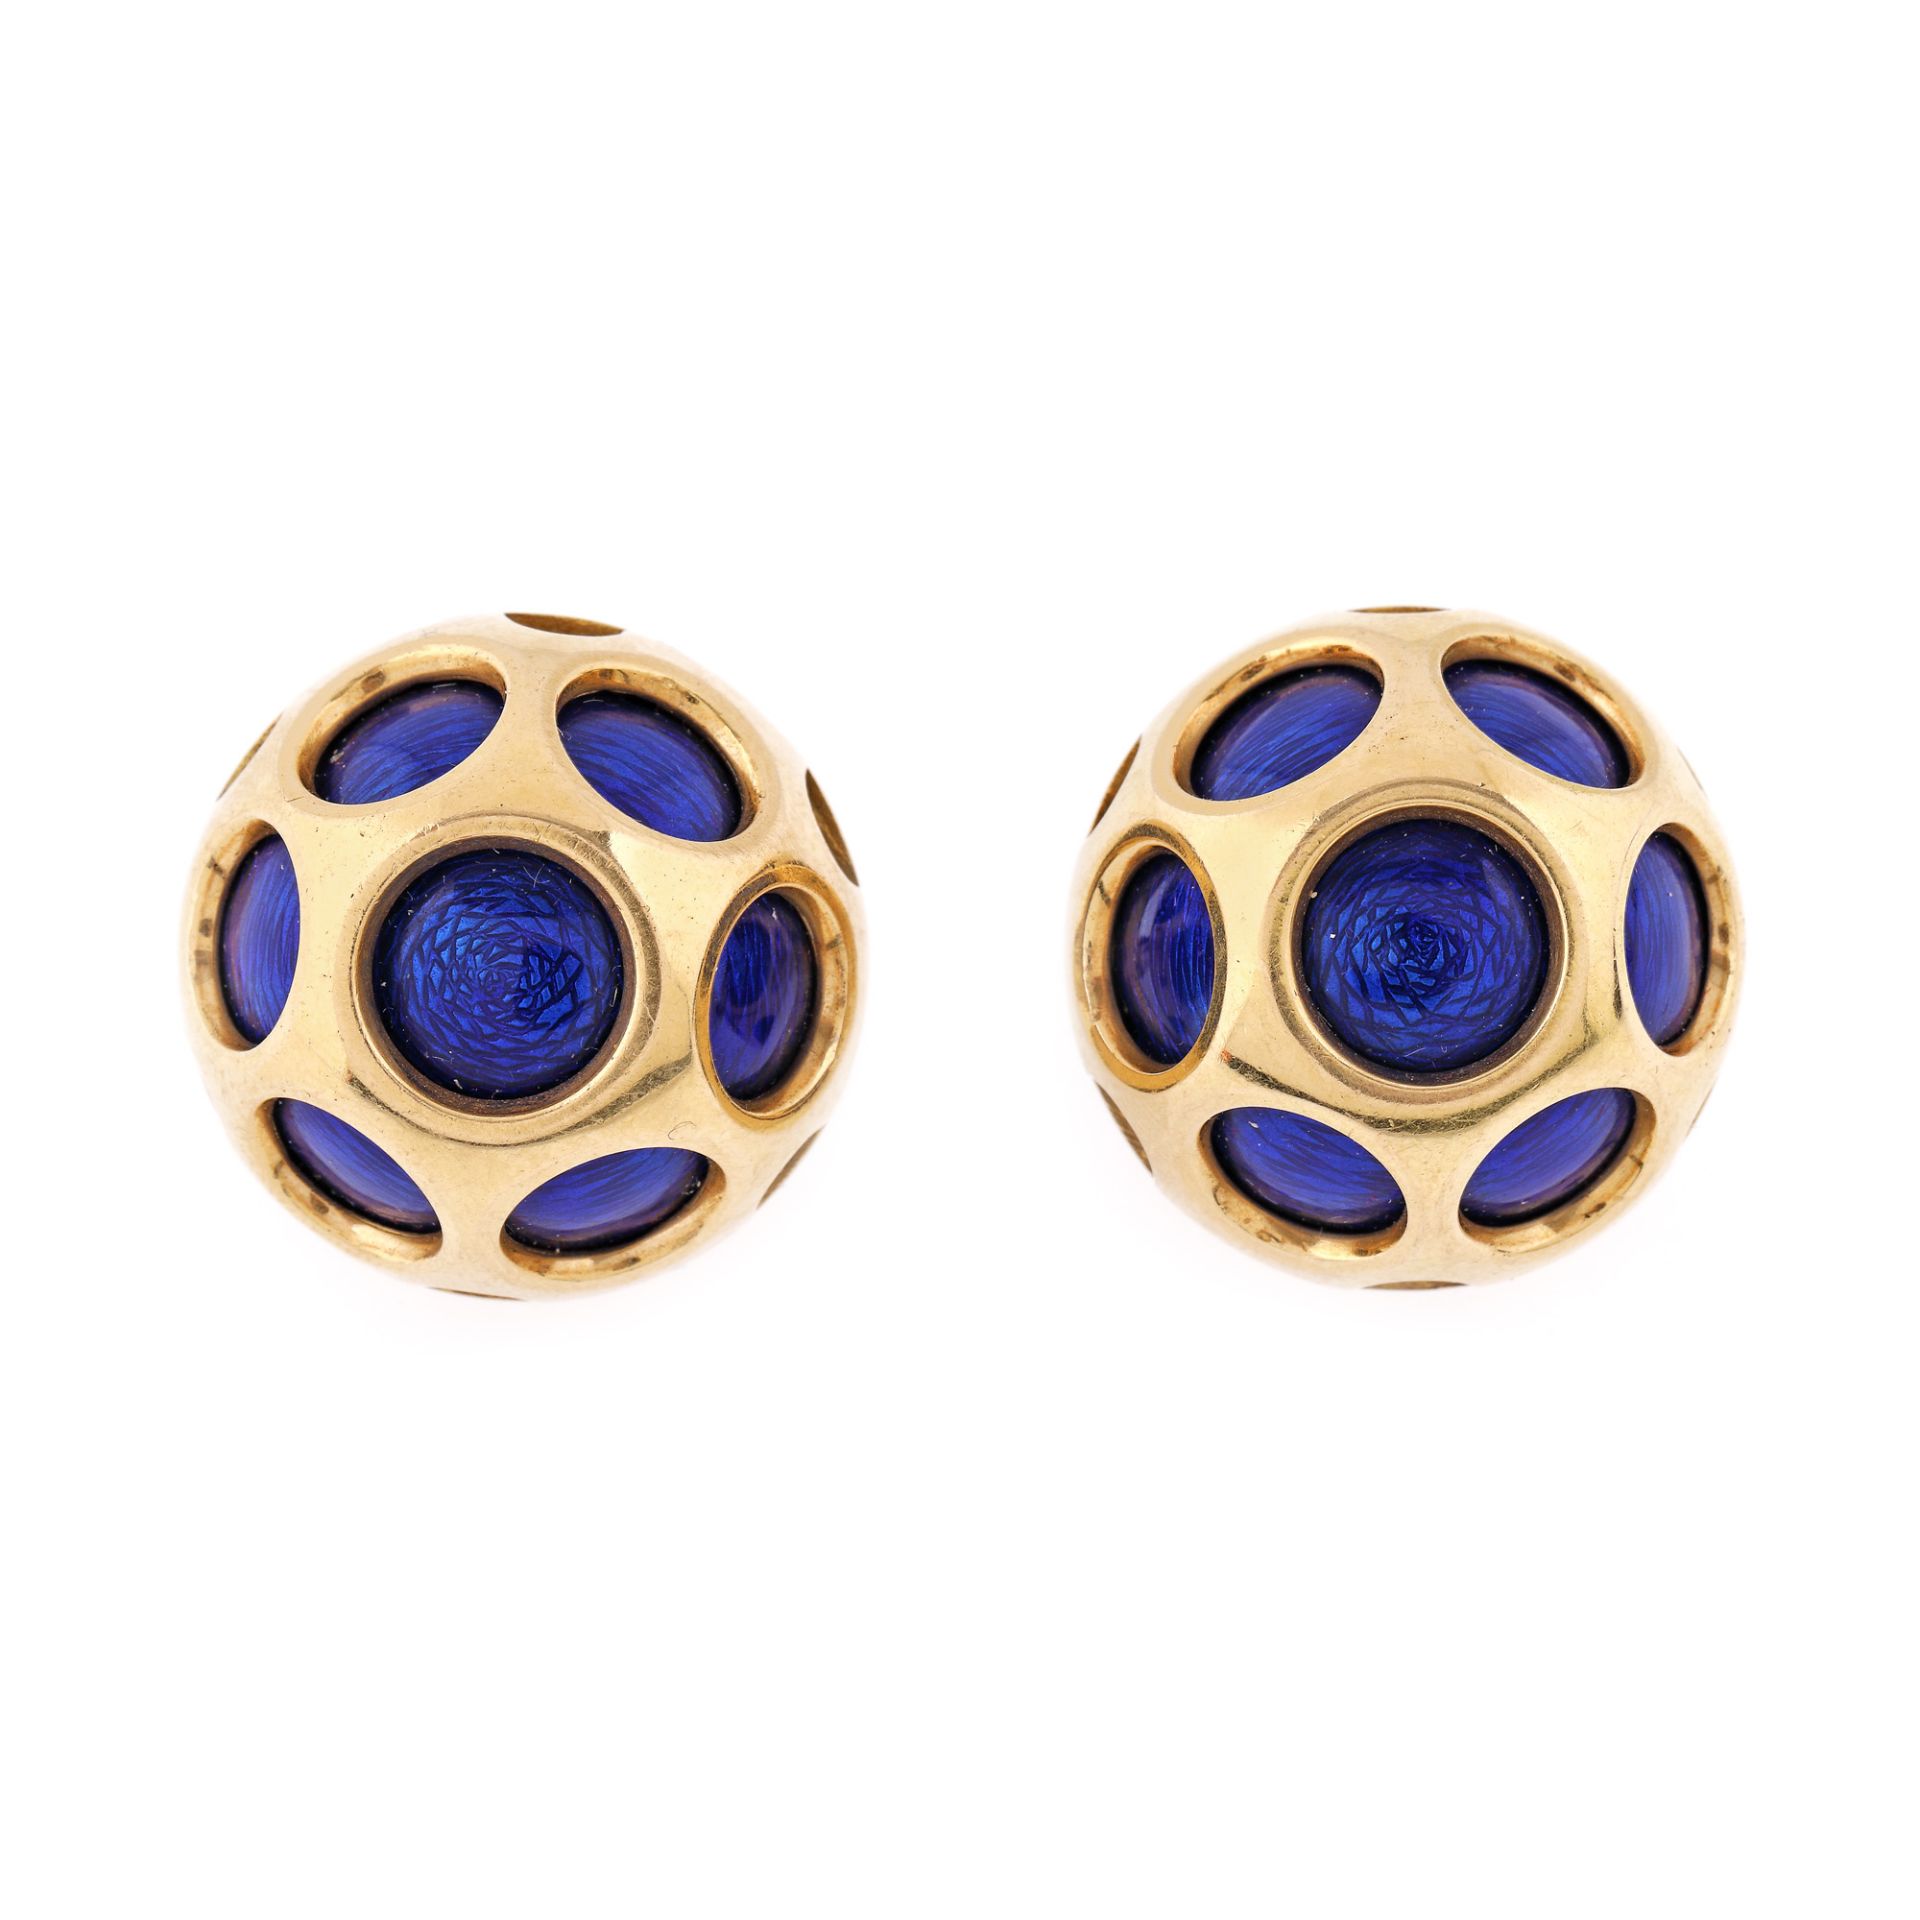 Gold clip-on earrings, decorated with enamel